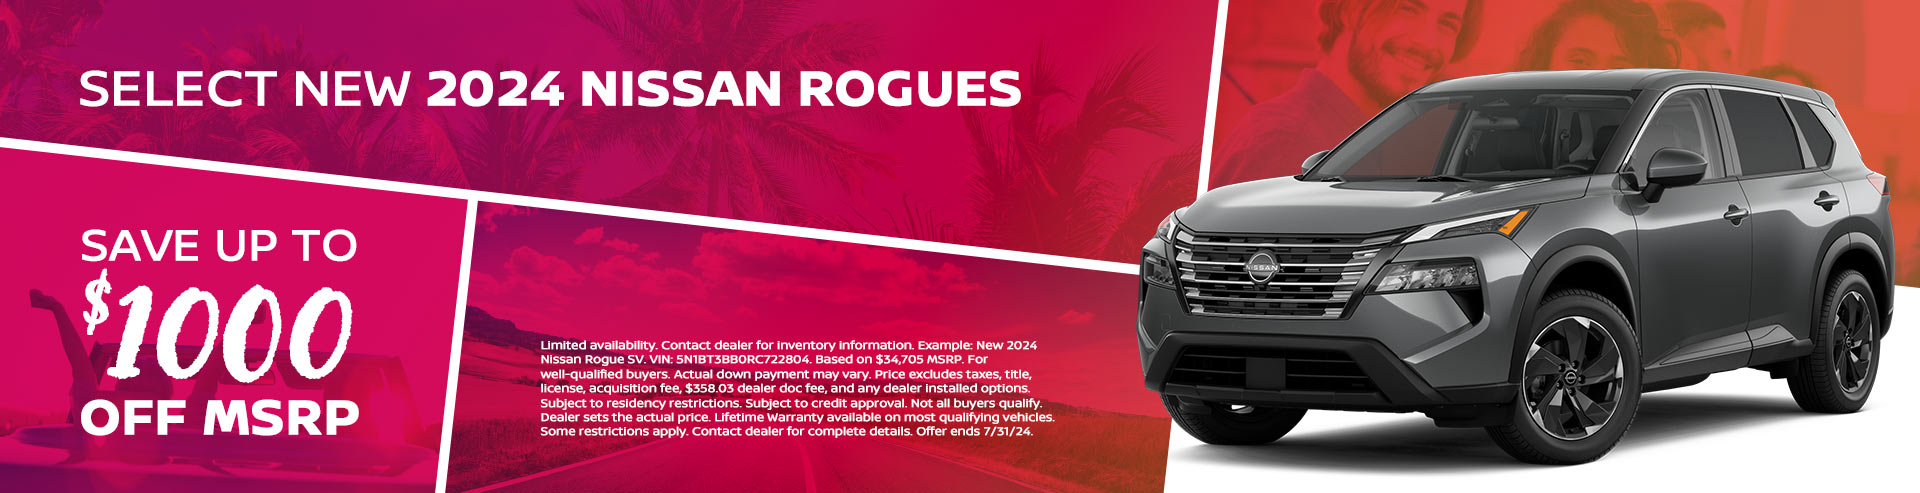 Save up to $1,000 off MSRP on select New 2024 Nissan Rogues